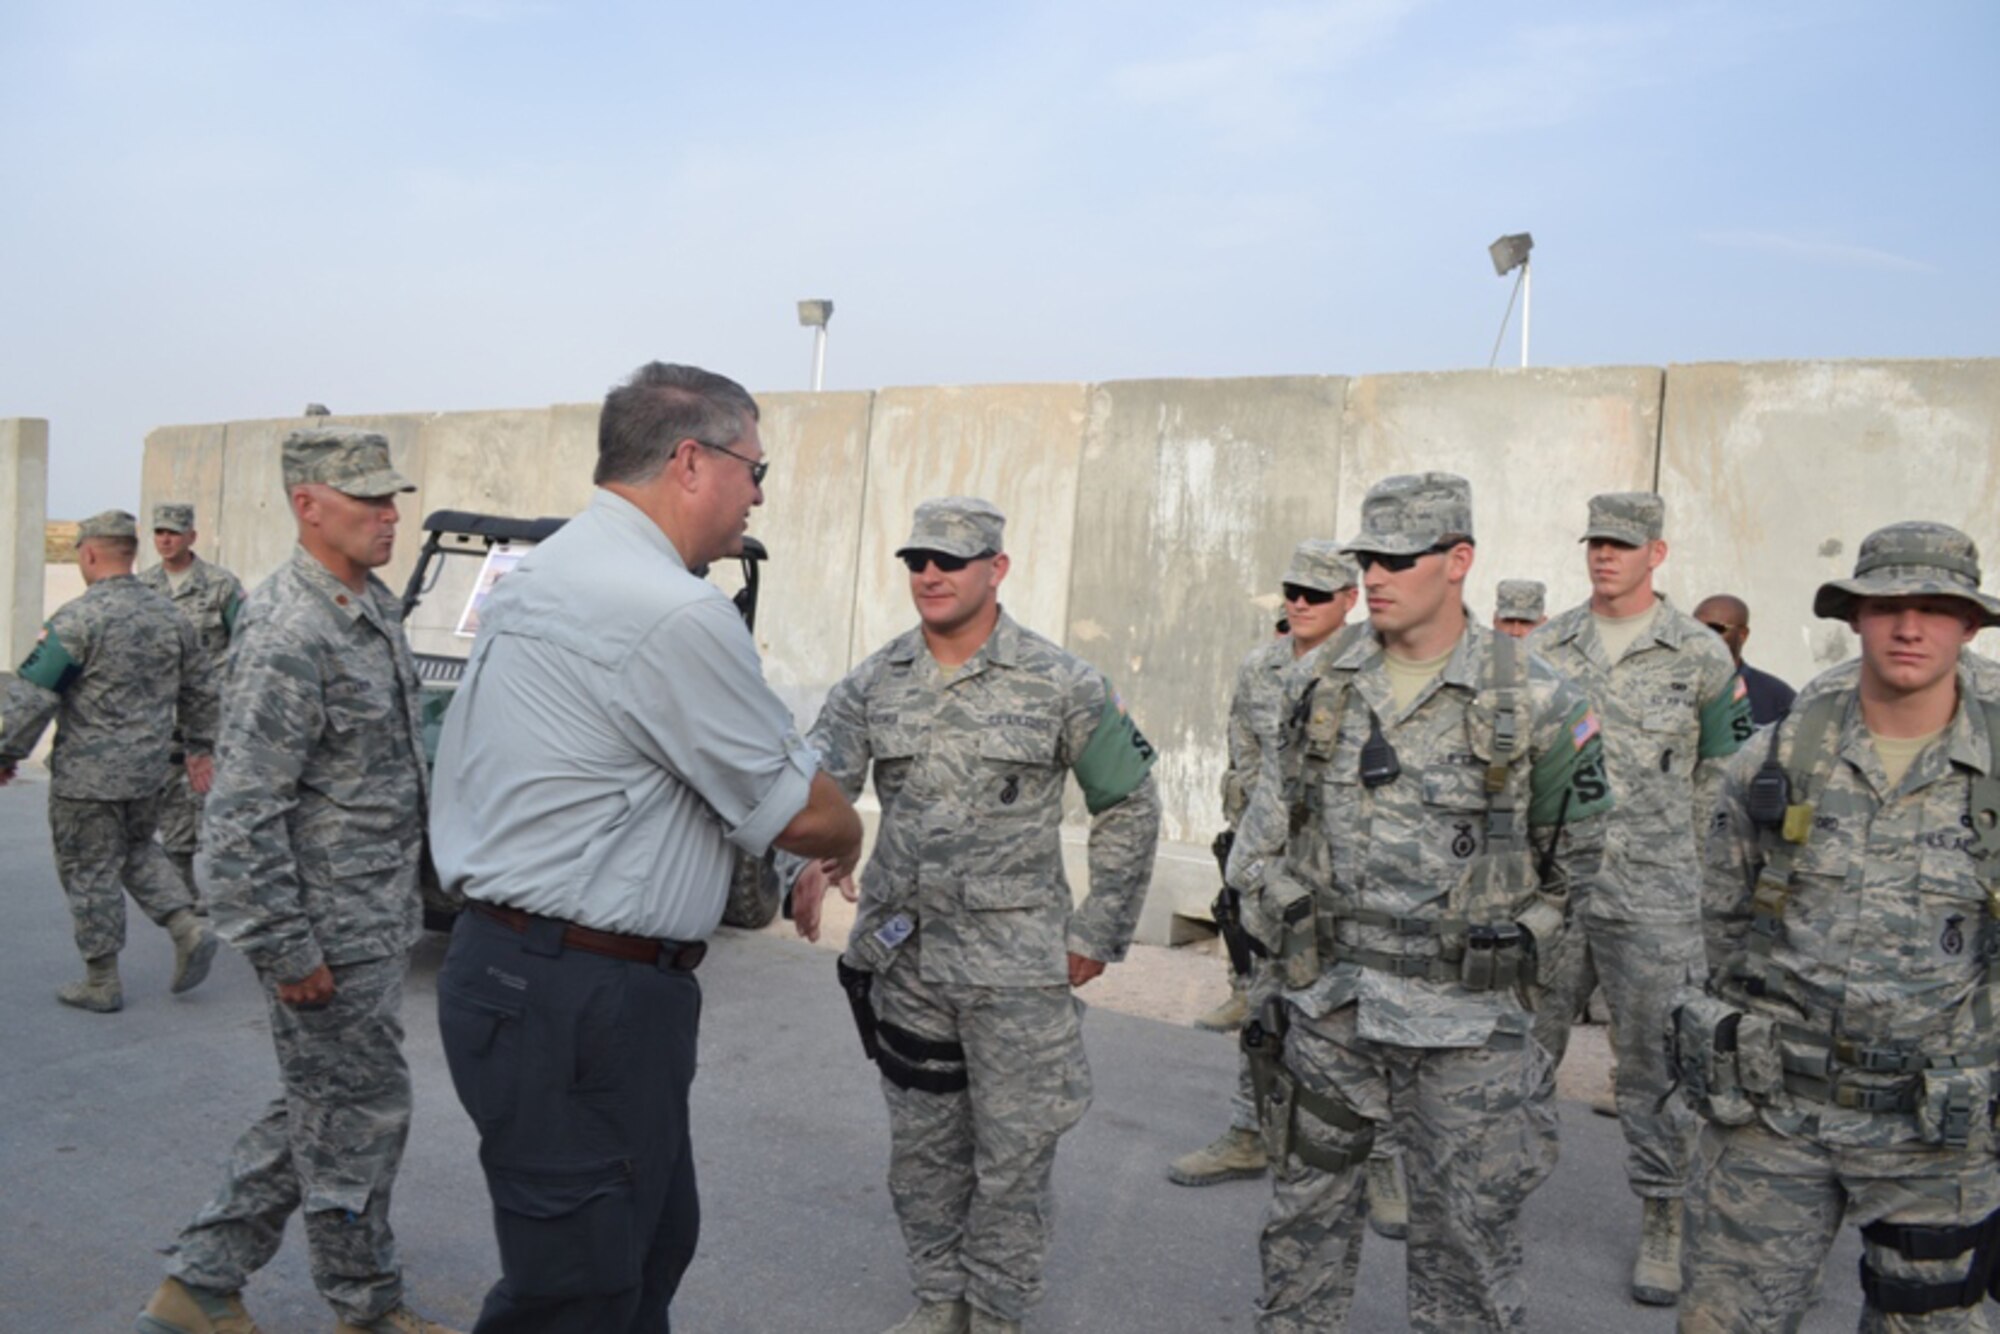 SOUTHWEST ASIA – Secretary of the Air Force Michael B. Donley visits with members of the South Dakota Air National Guard’s 114th Security Forces Squadron during a recent visit to Southwest Asia Aug. 24, 2012.  The 114th SFS, based out of Joe Foss Field in Sioux Falls, S.D., has been deployed since April and has been providing law enforcement, troop escort and security work within a base in Southwest Asia. (U.S. Air Force photo by 405th Expeditionary Security Forces Squadron) (RELEASED)